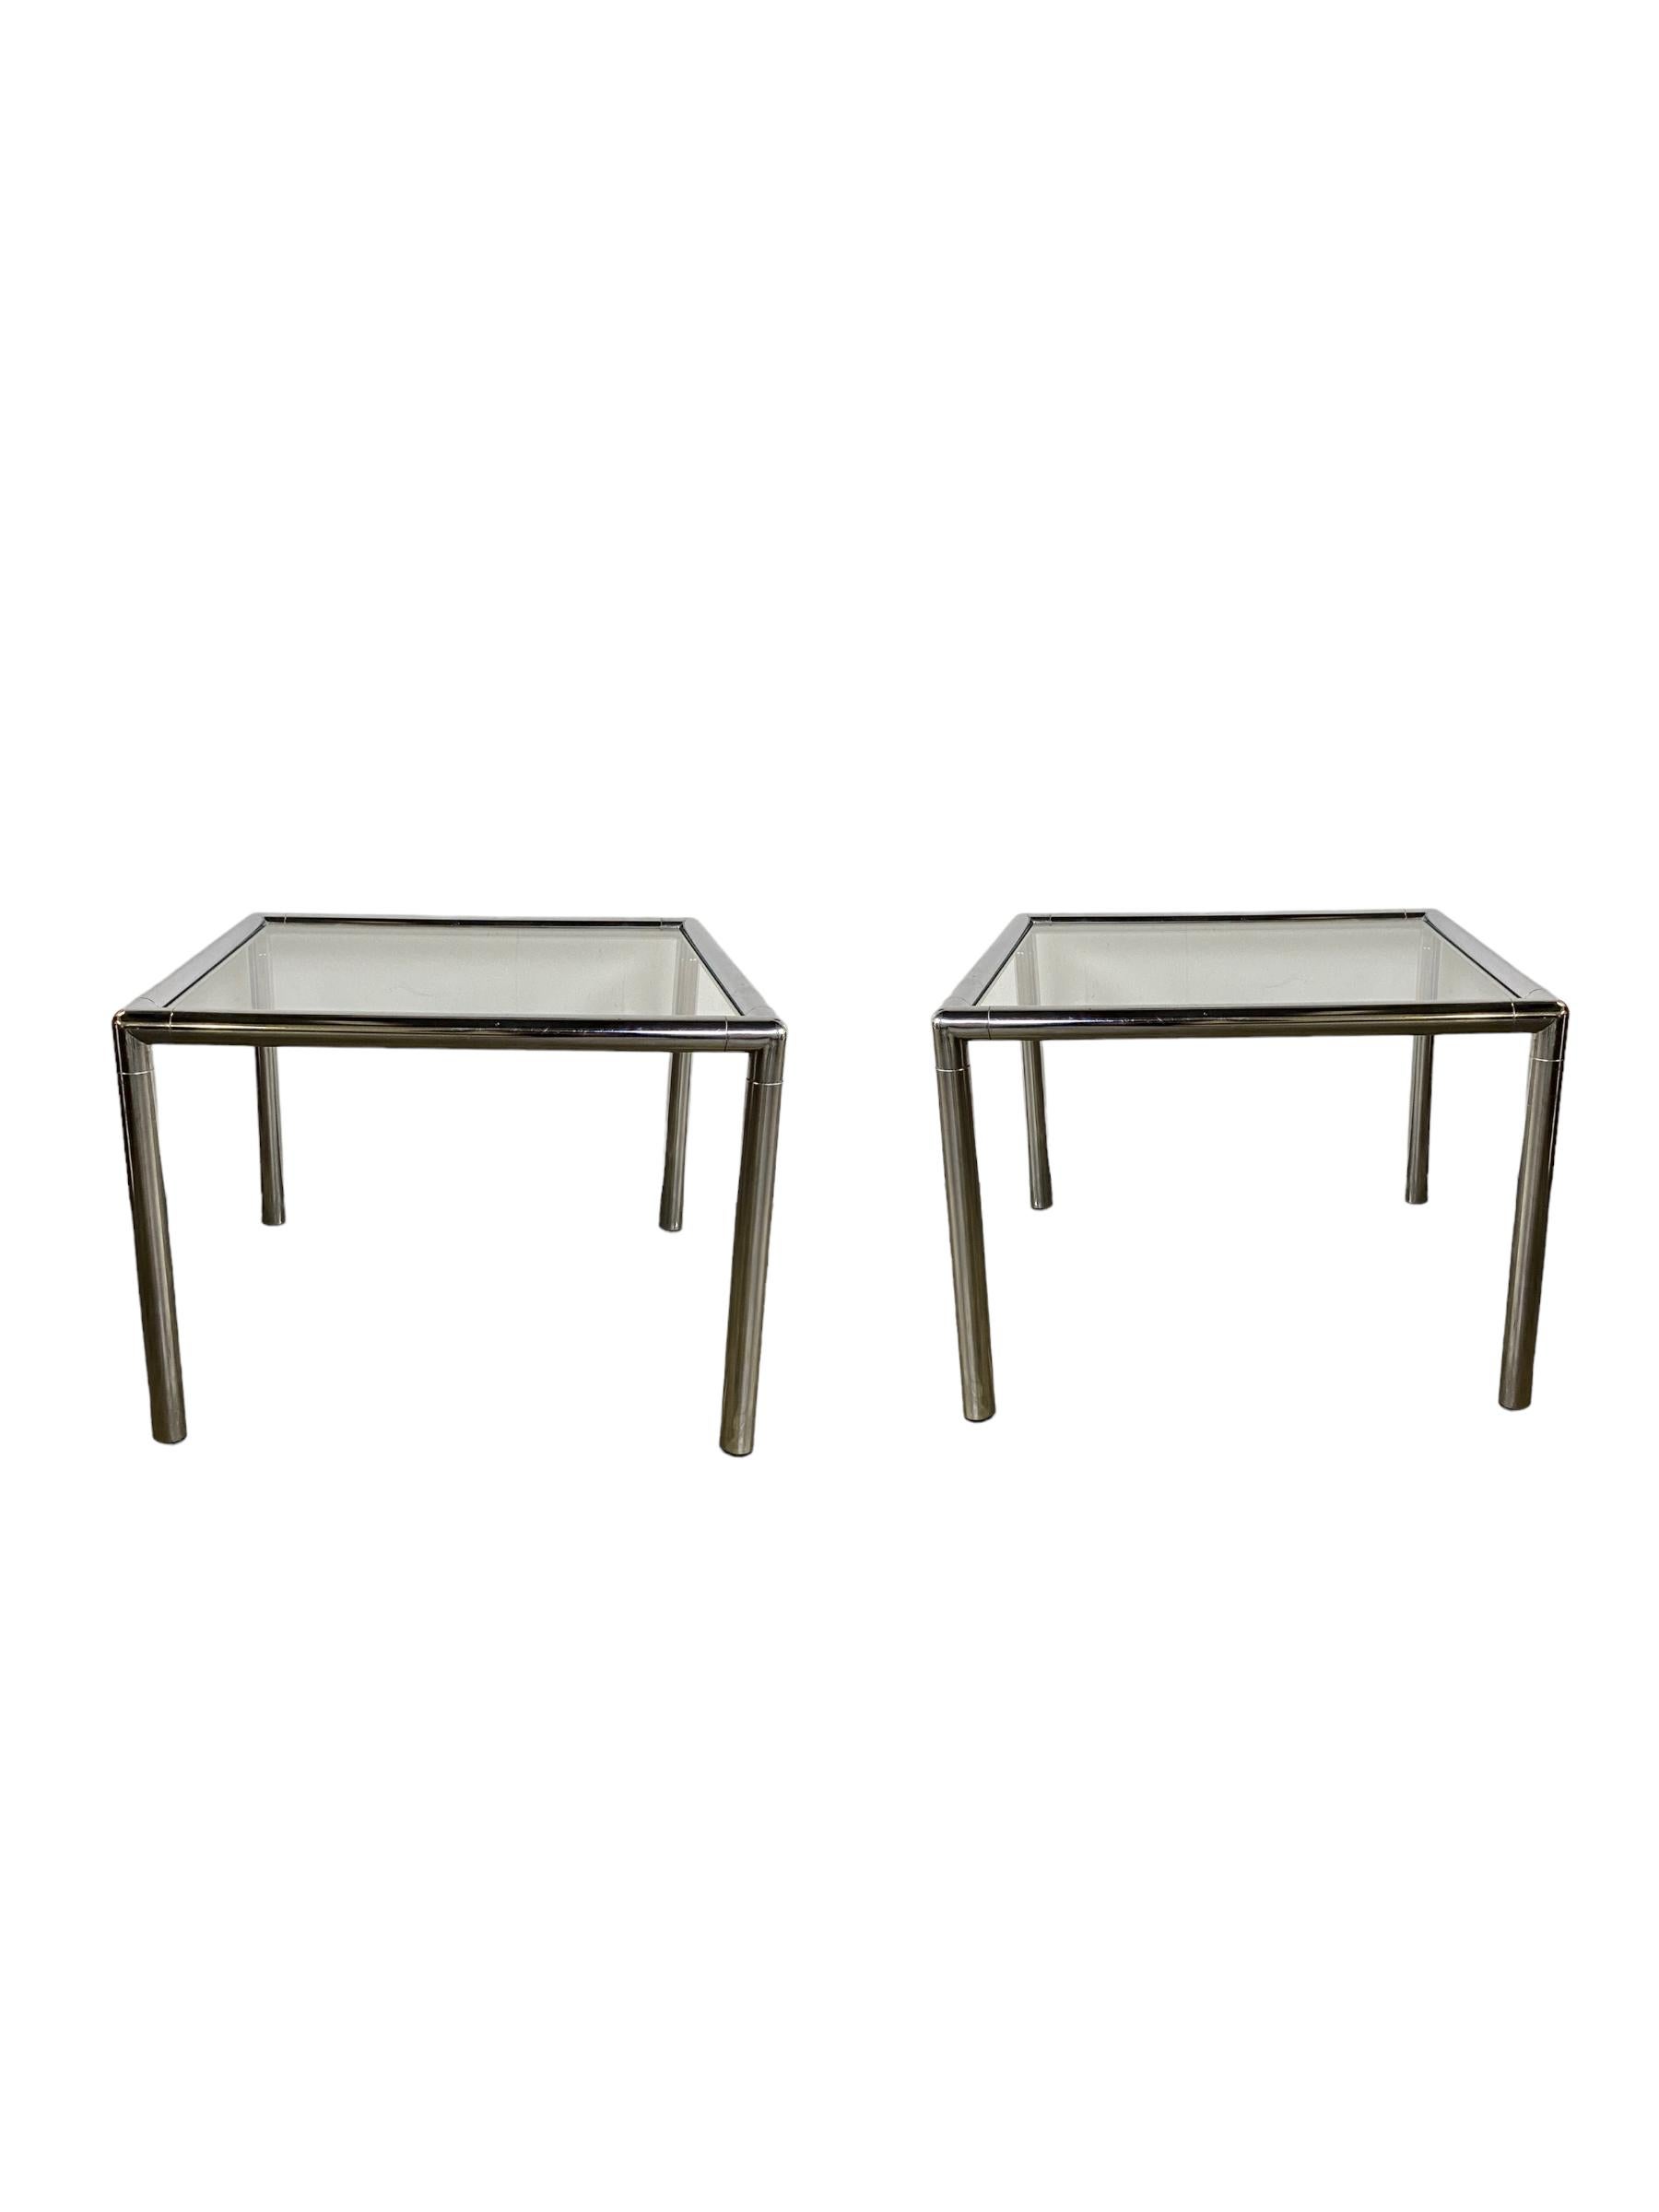 Late 20th Century Pair of Chrome Tube End Tables For Sale